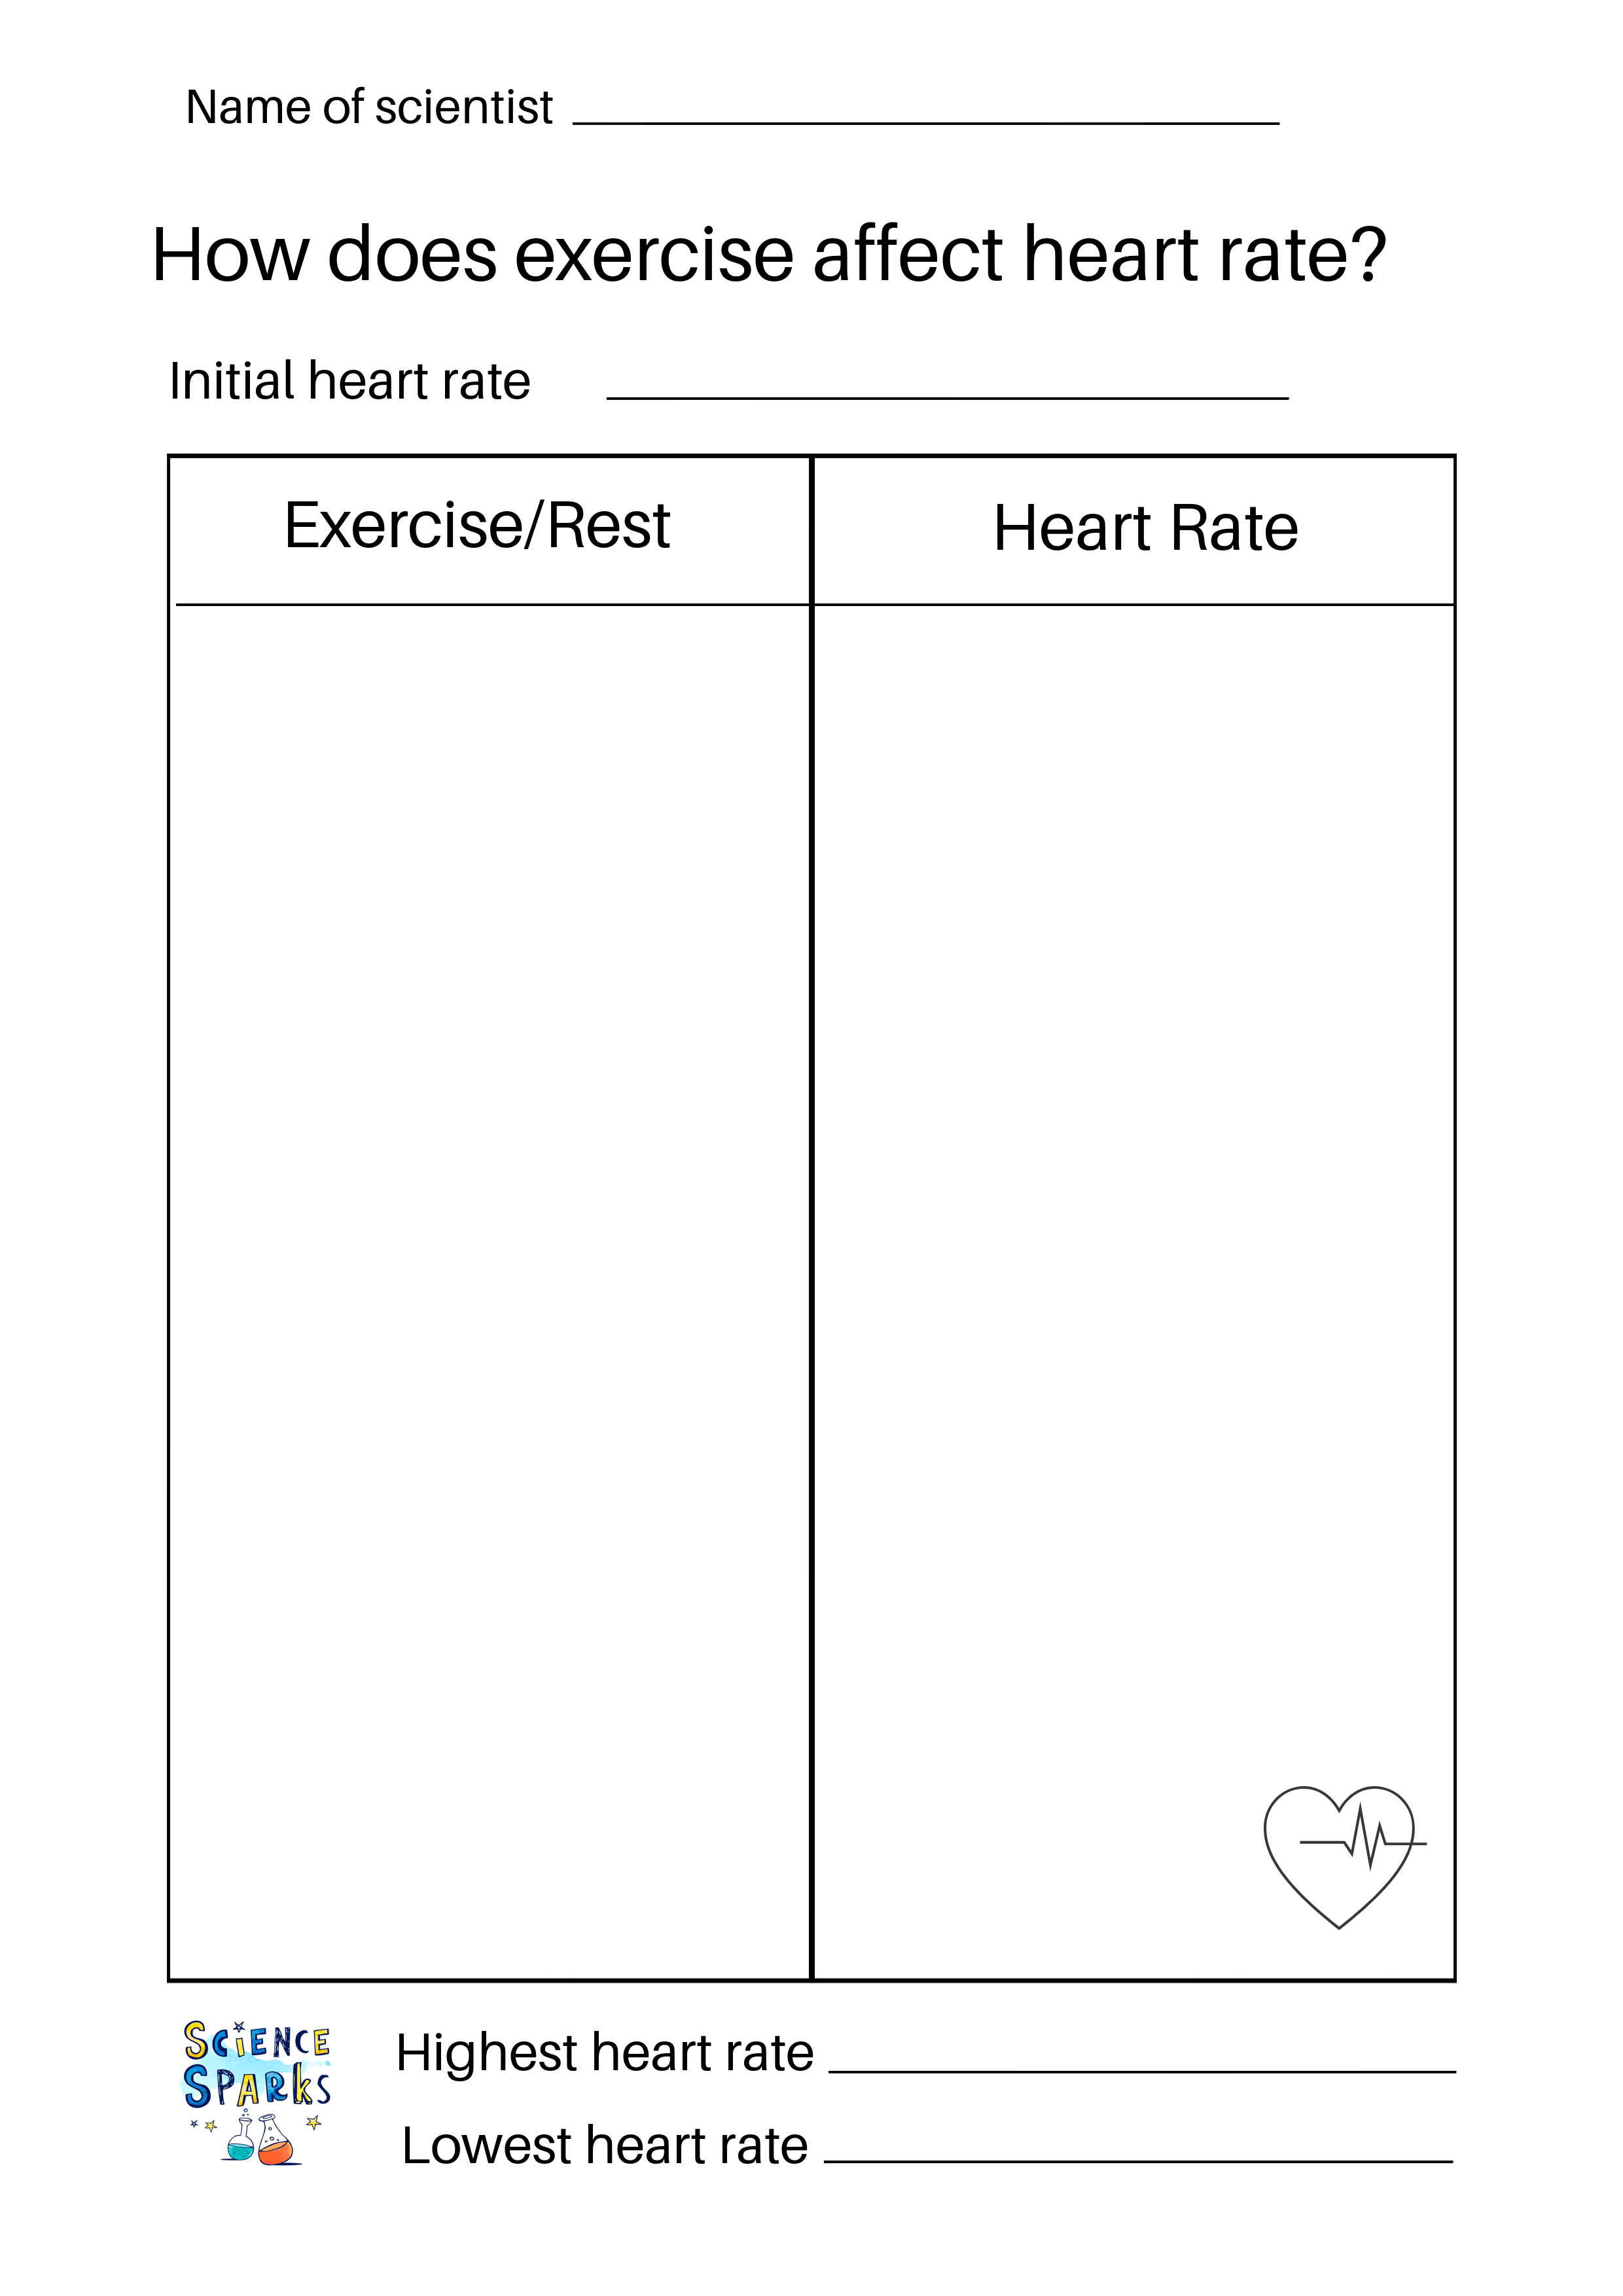 How does exercise affect heart rate investigation results sheet